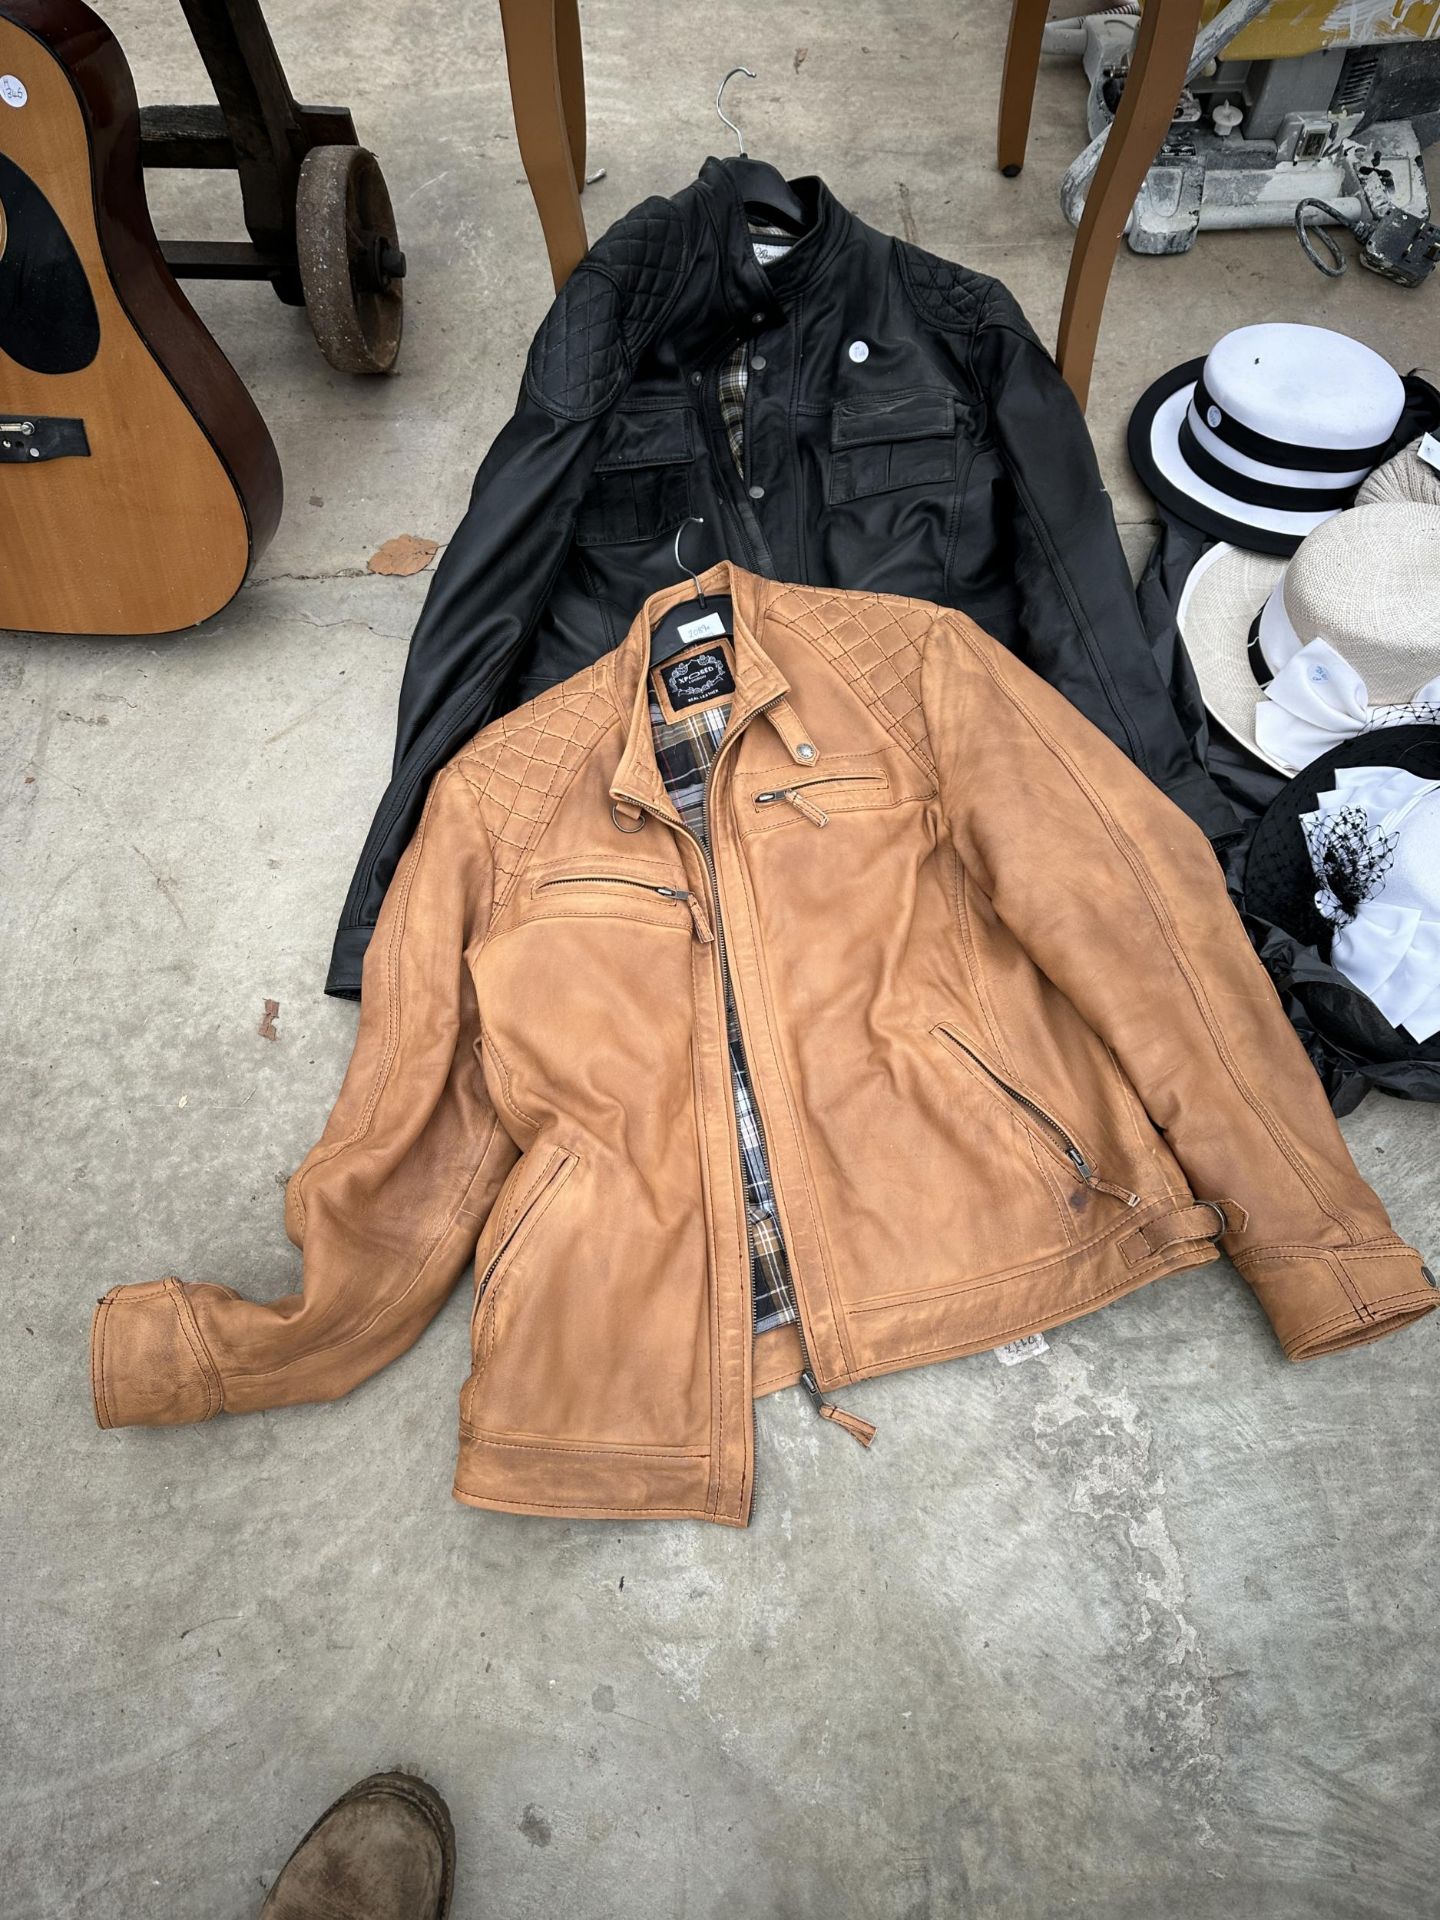 TWO MENS LEATHER JACKETS